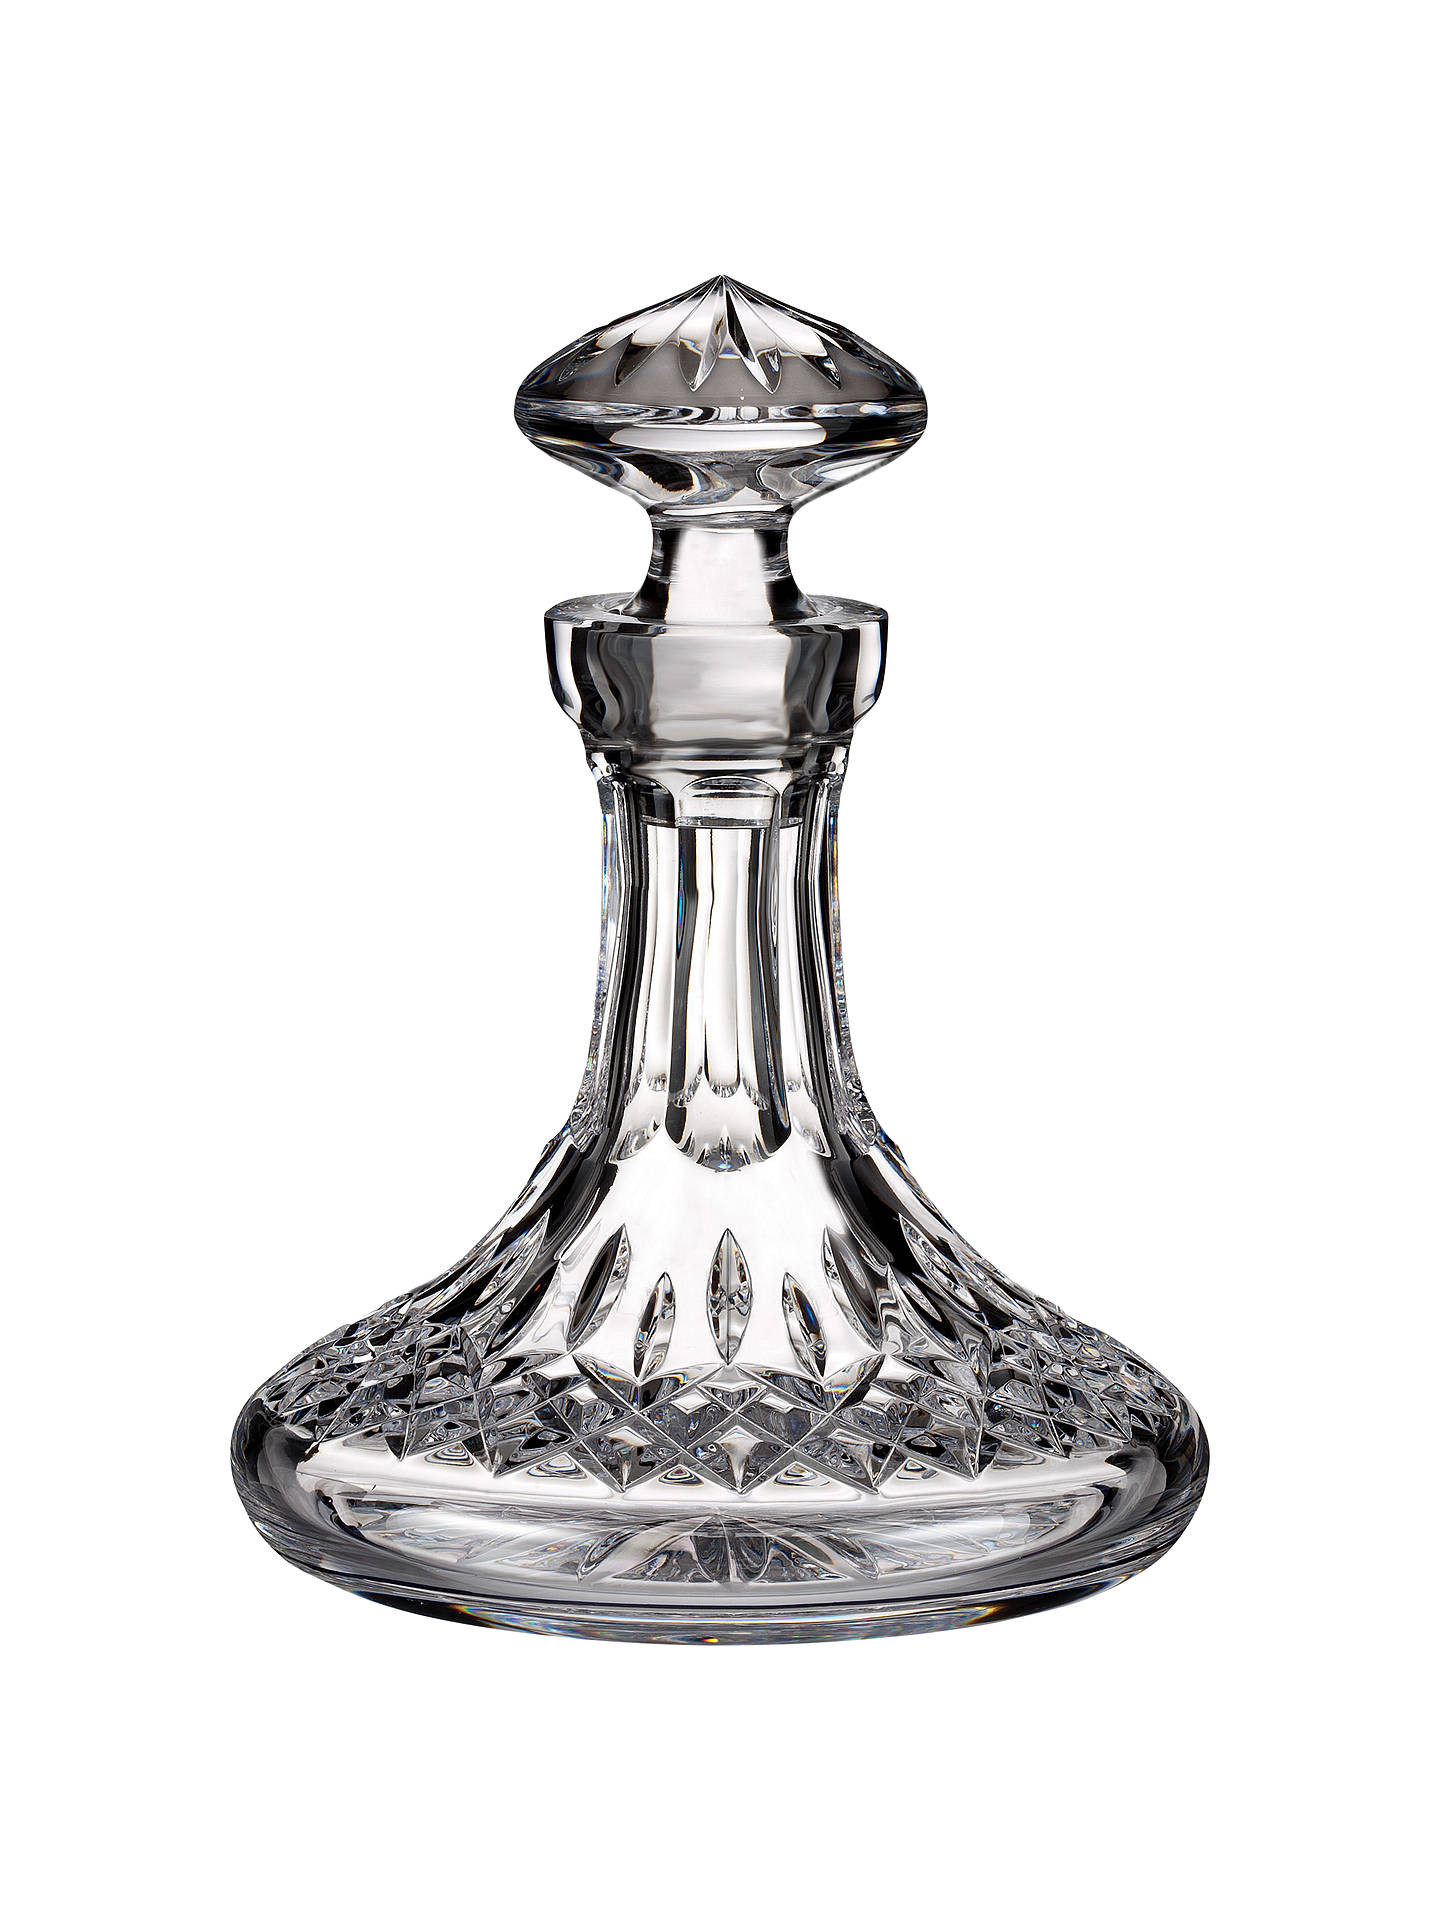 24 Perfect Waterford Lismore 8 Flared Vase 2024 free download waterford lismore 8 flared vase of waterford lismore connoisseur cut lead crystal mini ships decanter for buywaterford lismore connoisseur cut lead crystal mini ships decanter 550ml online a